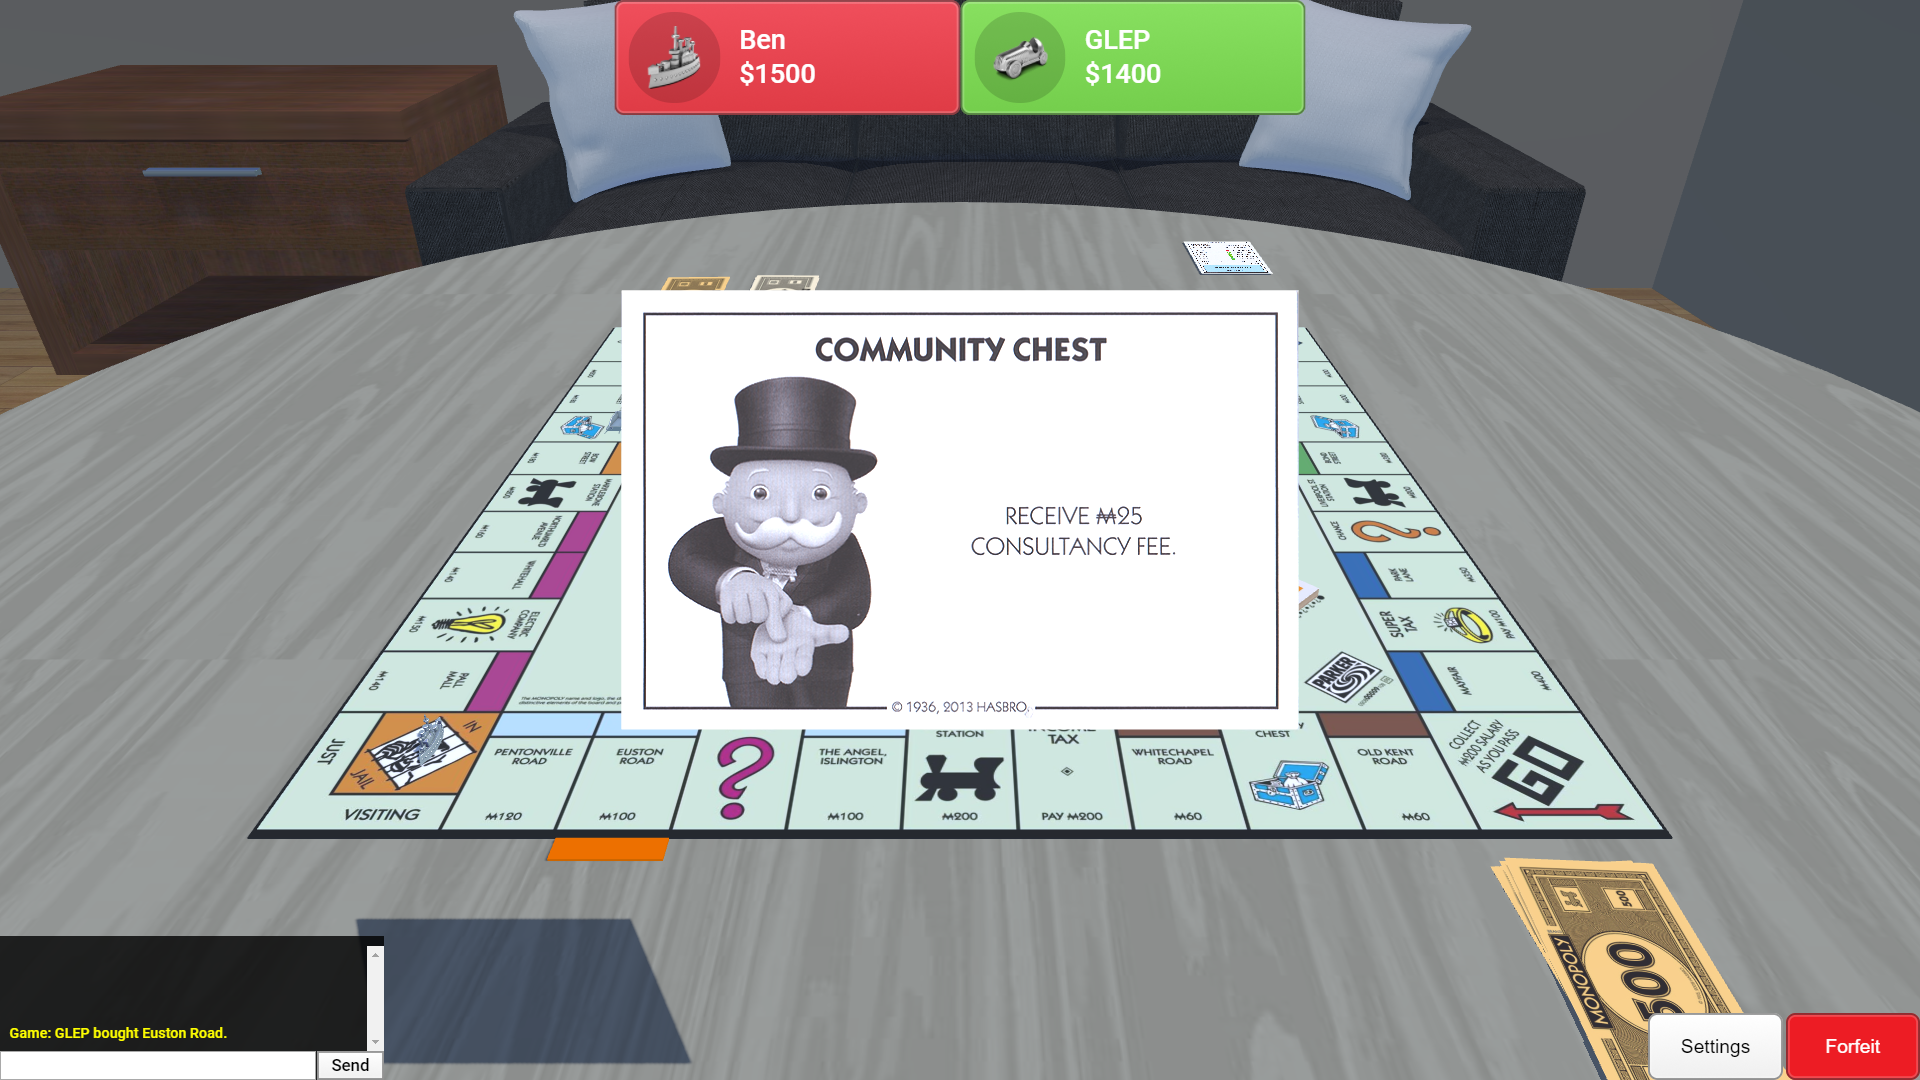 Monopoly.io – Browser Game